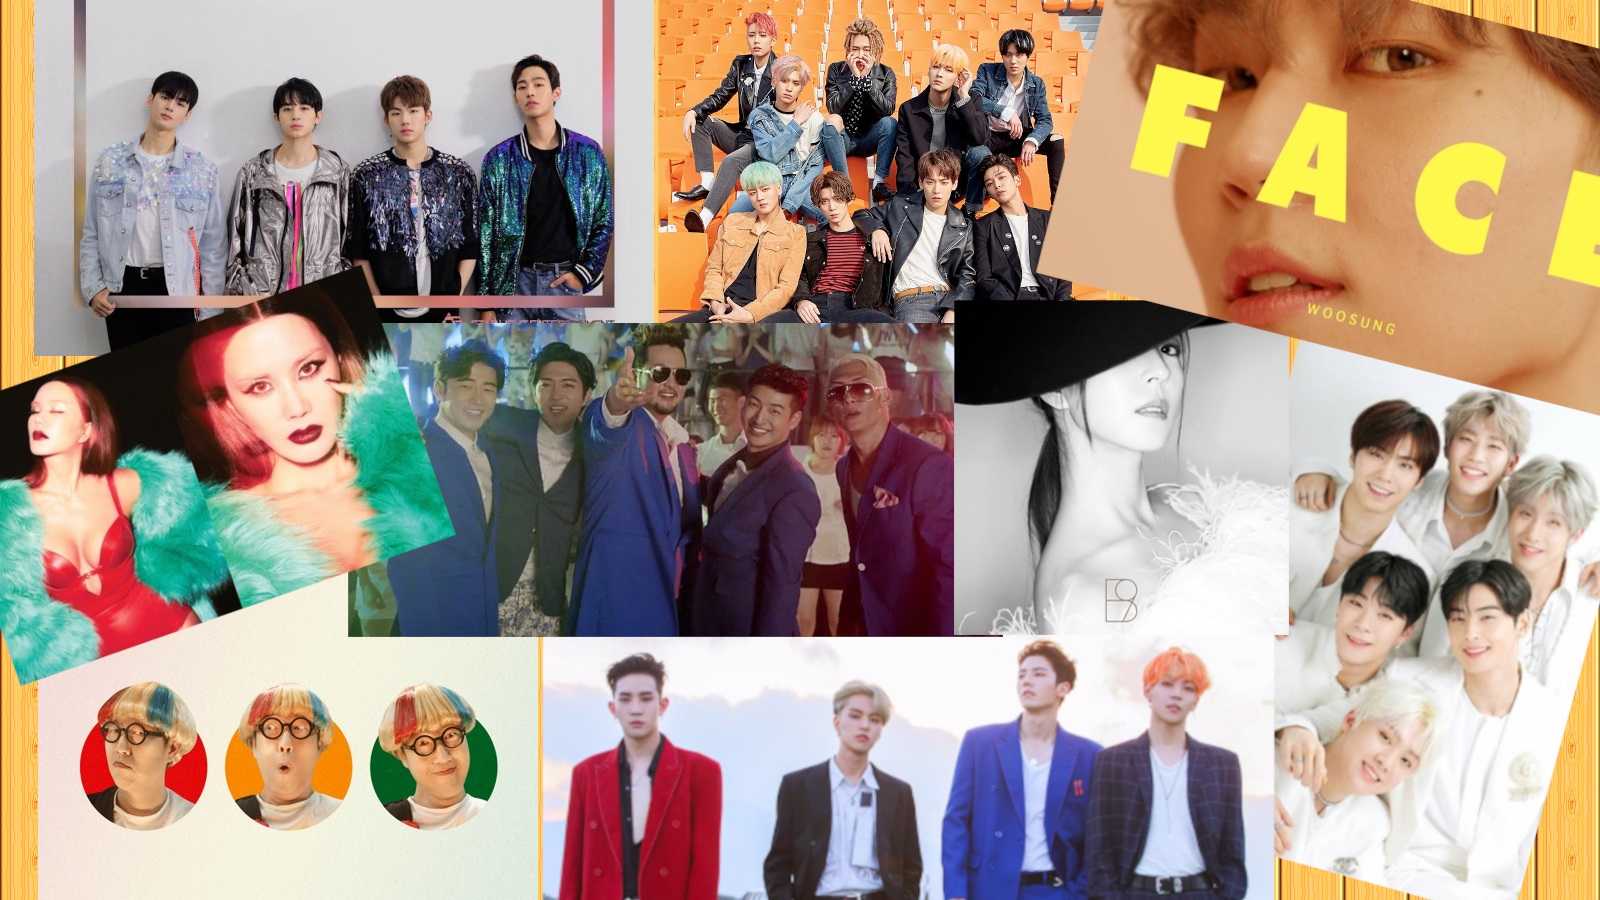 Underrated Summer Kpop Playlist © All rights reserved.